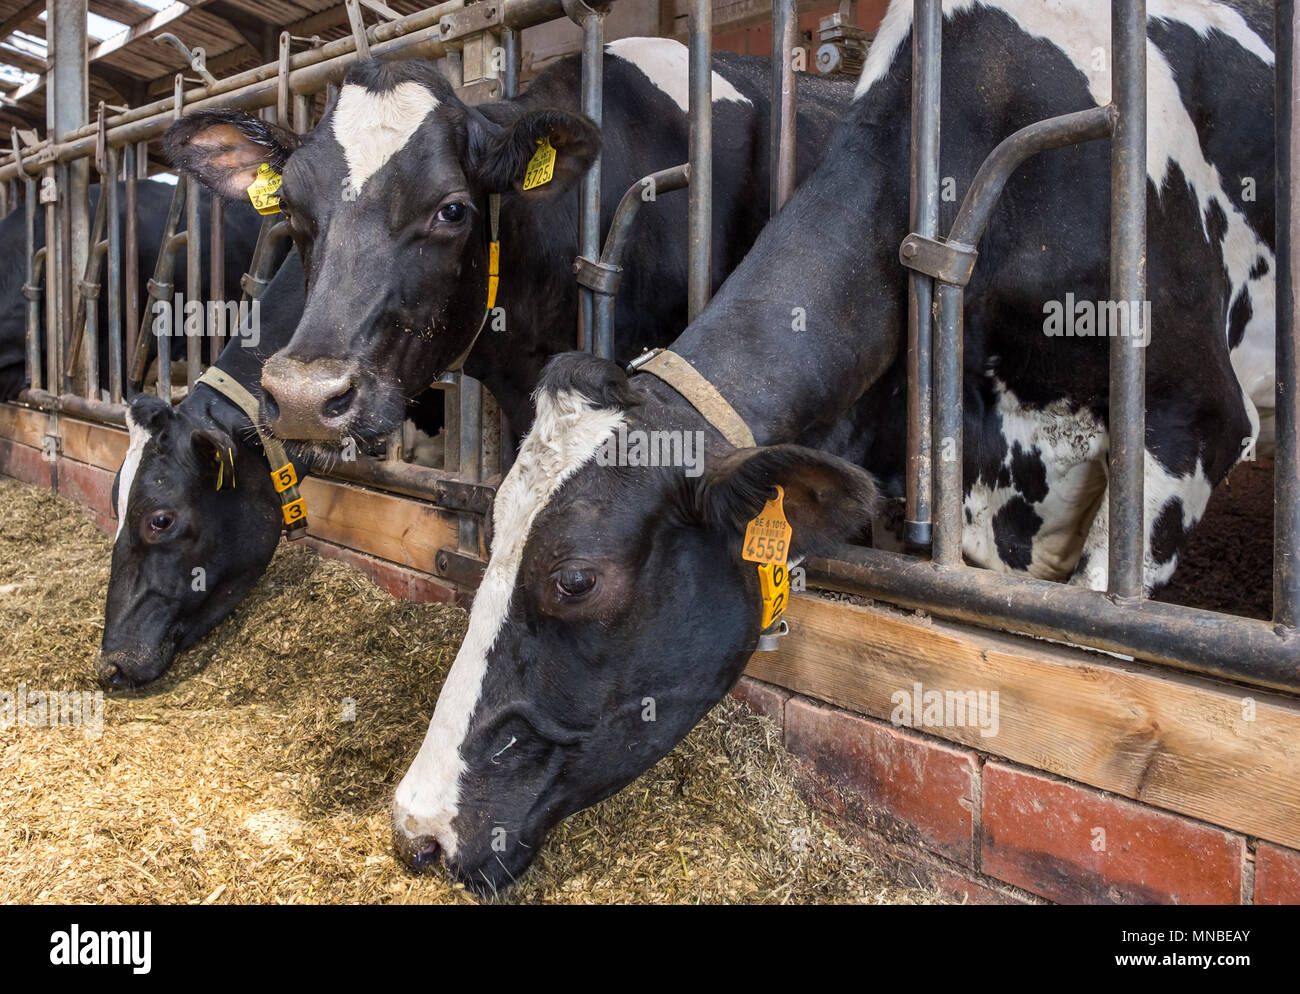 Black and white dairy cows in a farm Stock Photo